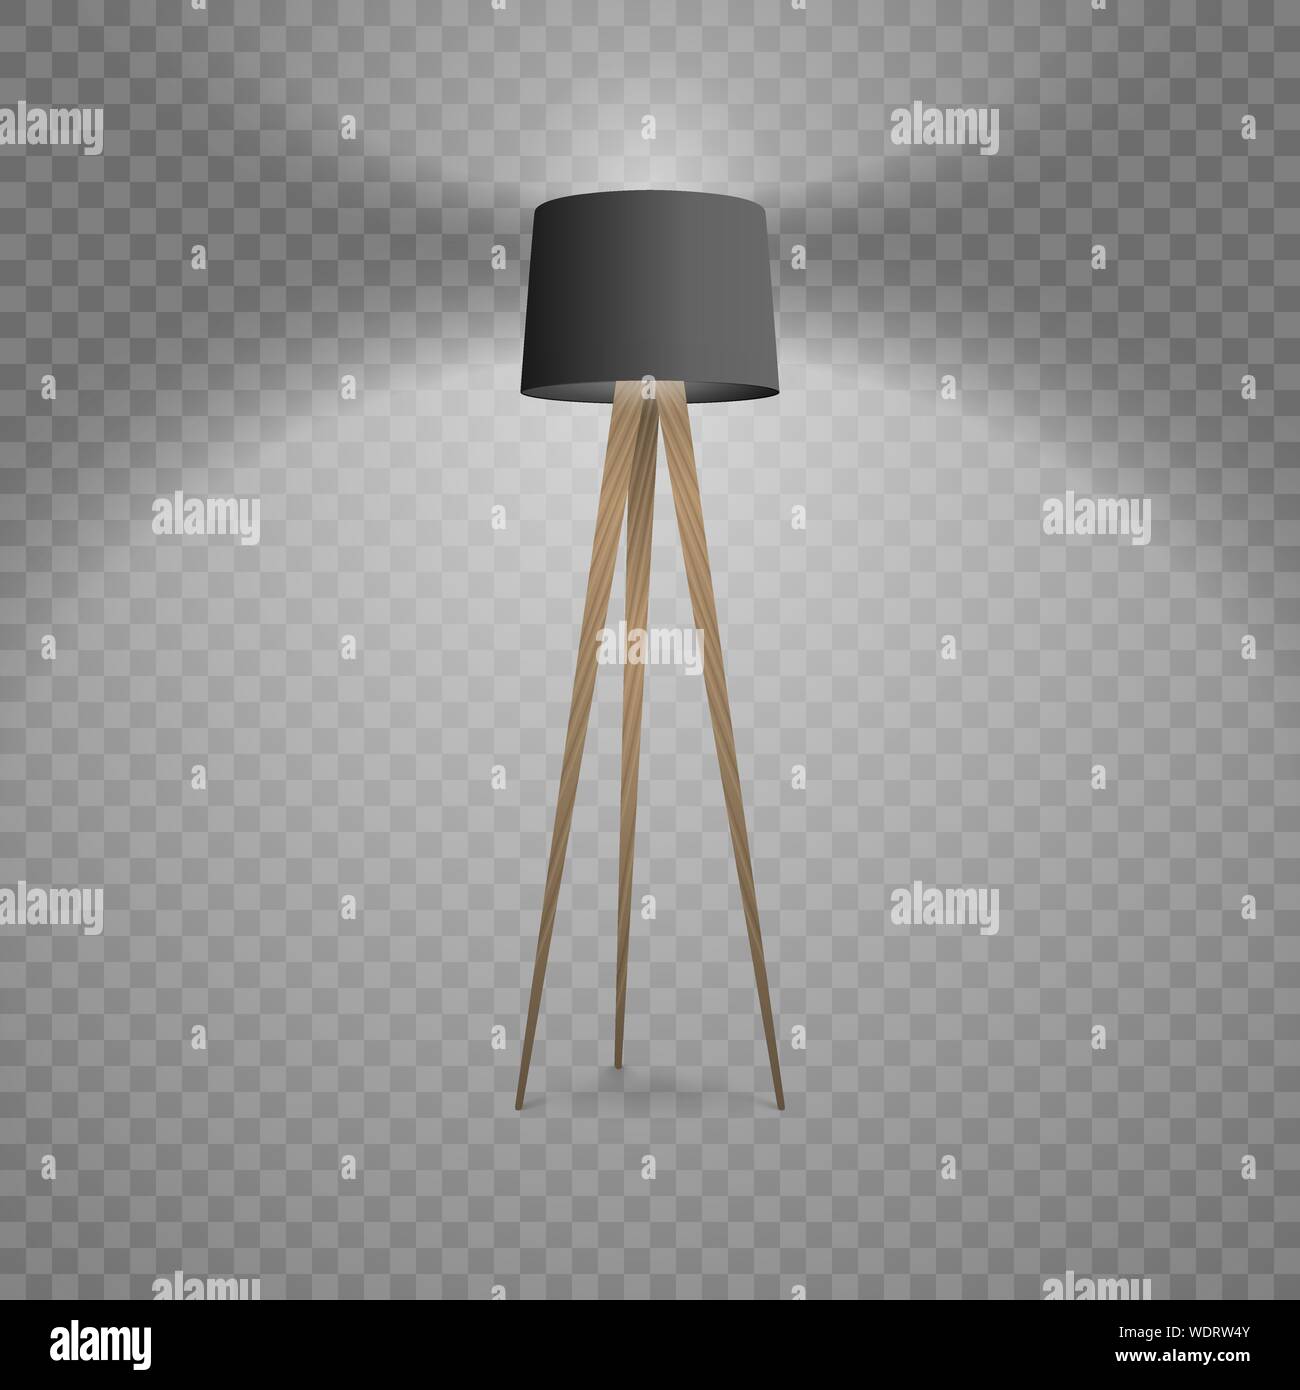 Vector 3d Realistic Render Illuminated Lamp Closeup Isolated on Transparent Background. Floor Lamp. Template of Electric Torchere for Interior Design Stock Vector